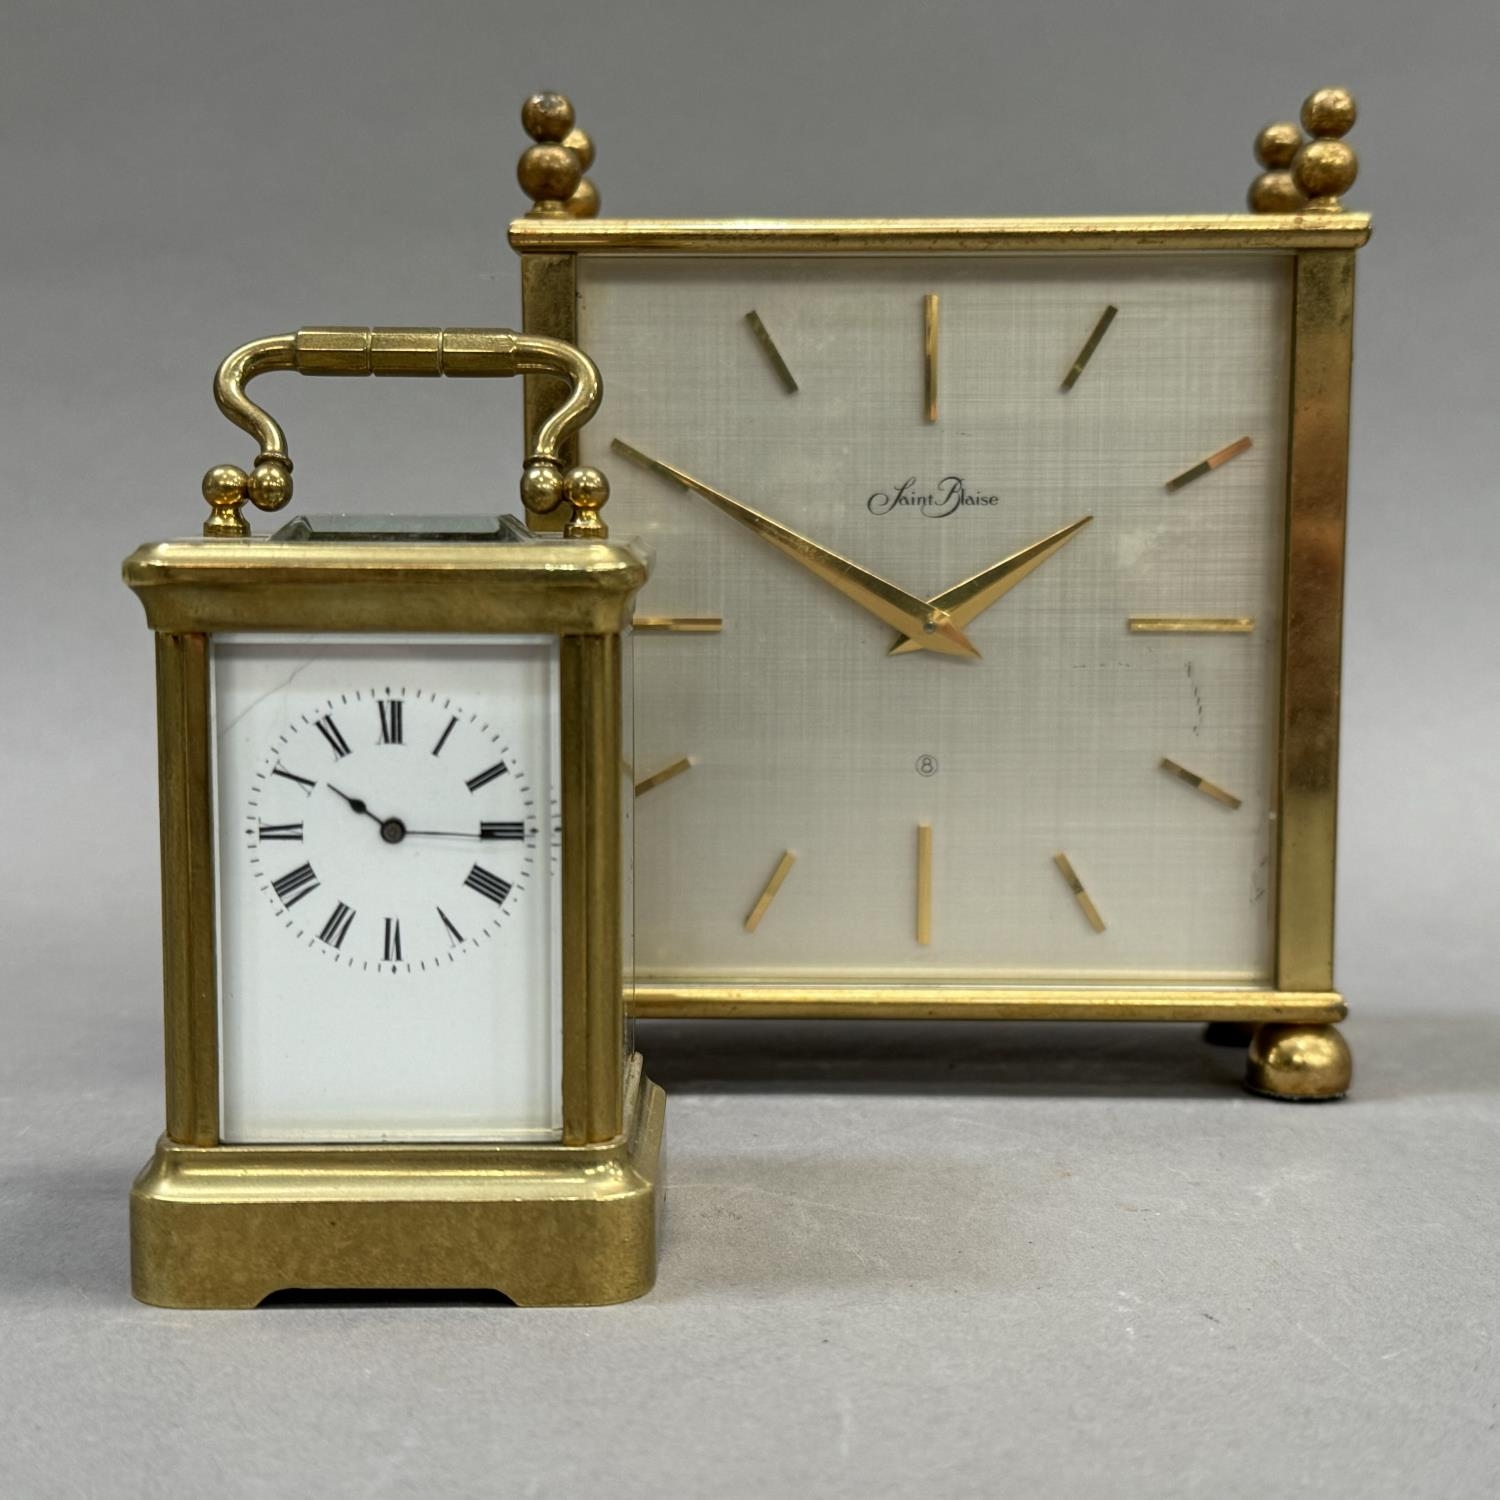 A late 19th/early 20th century miniature carriage clock, 8-day lever movement in fine light brass